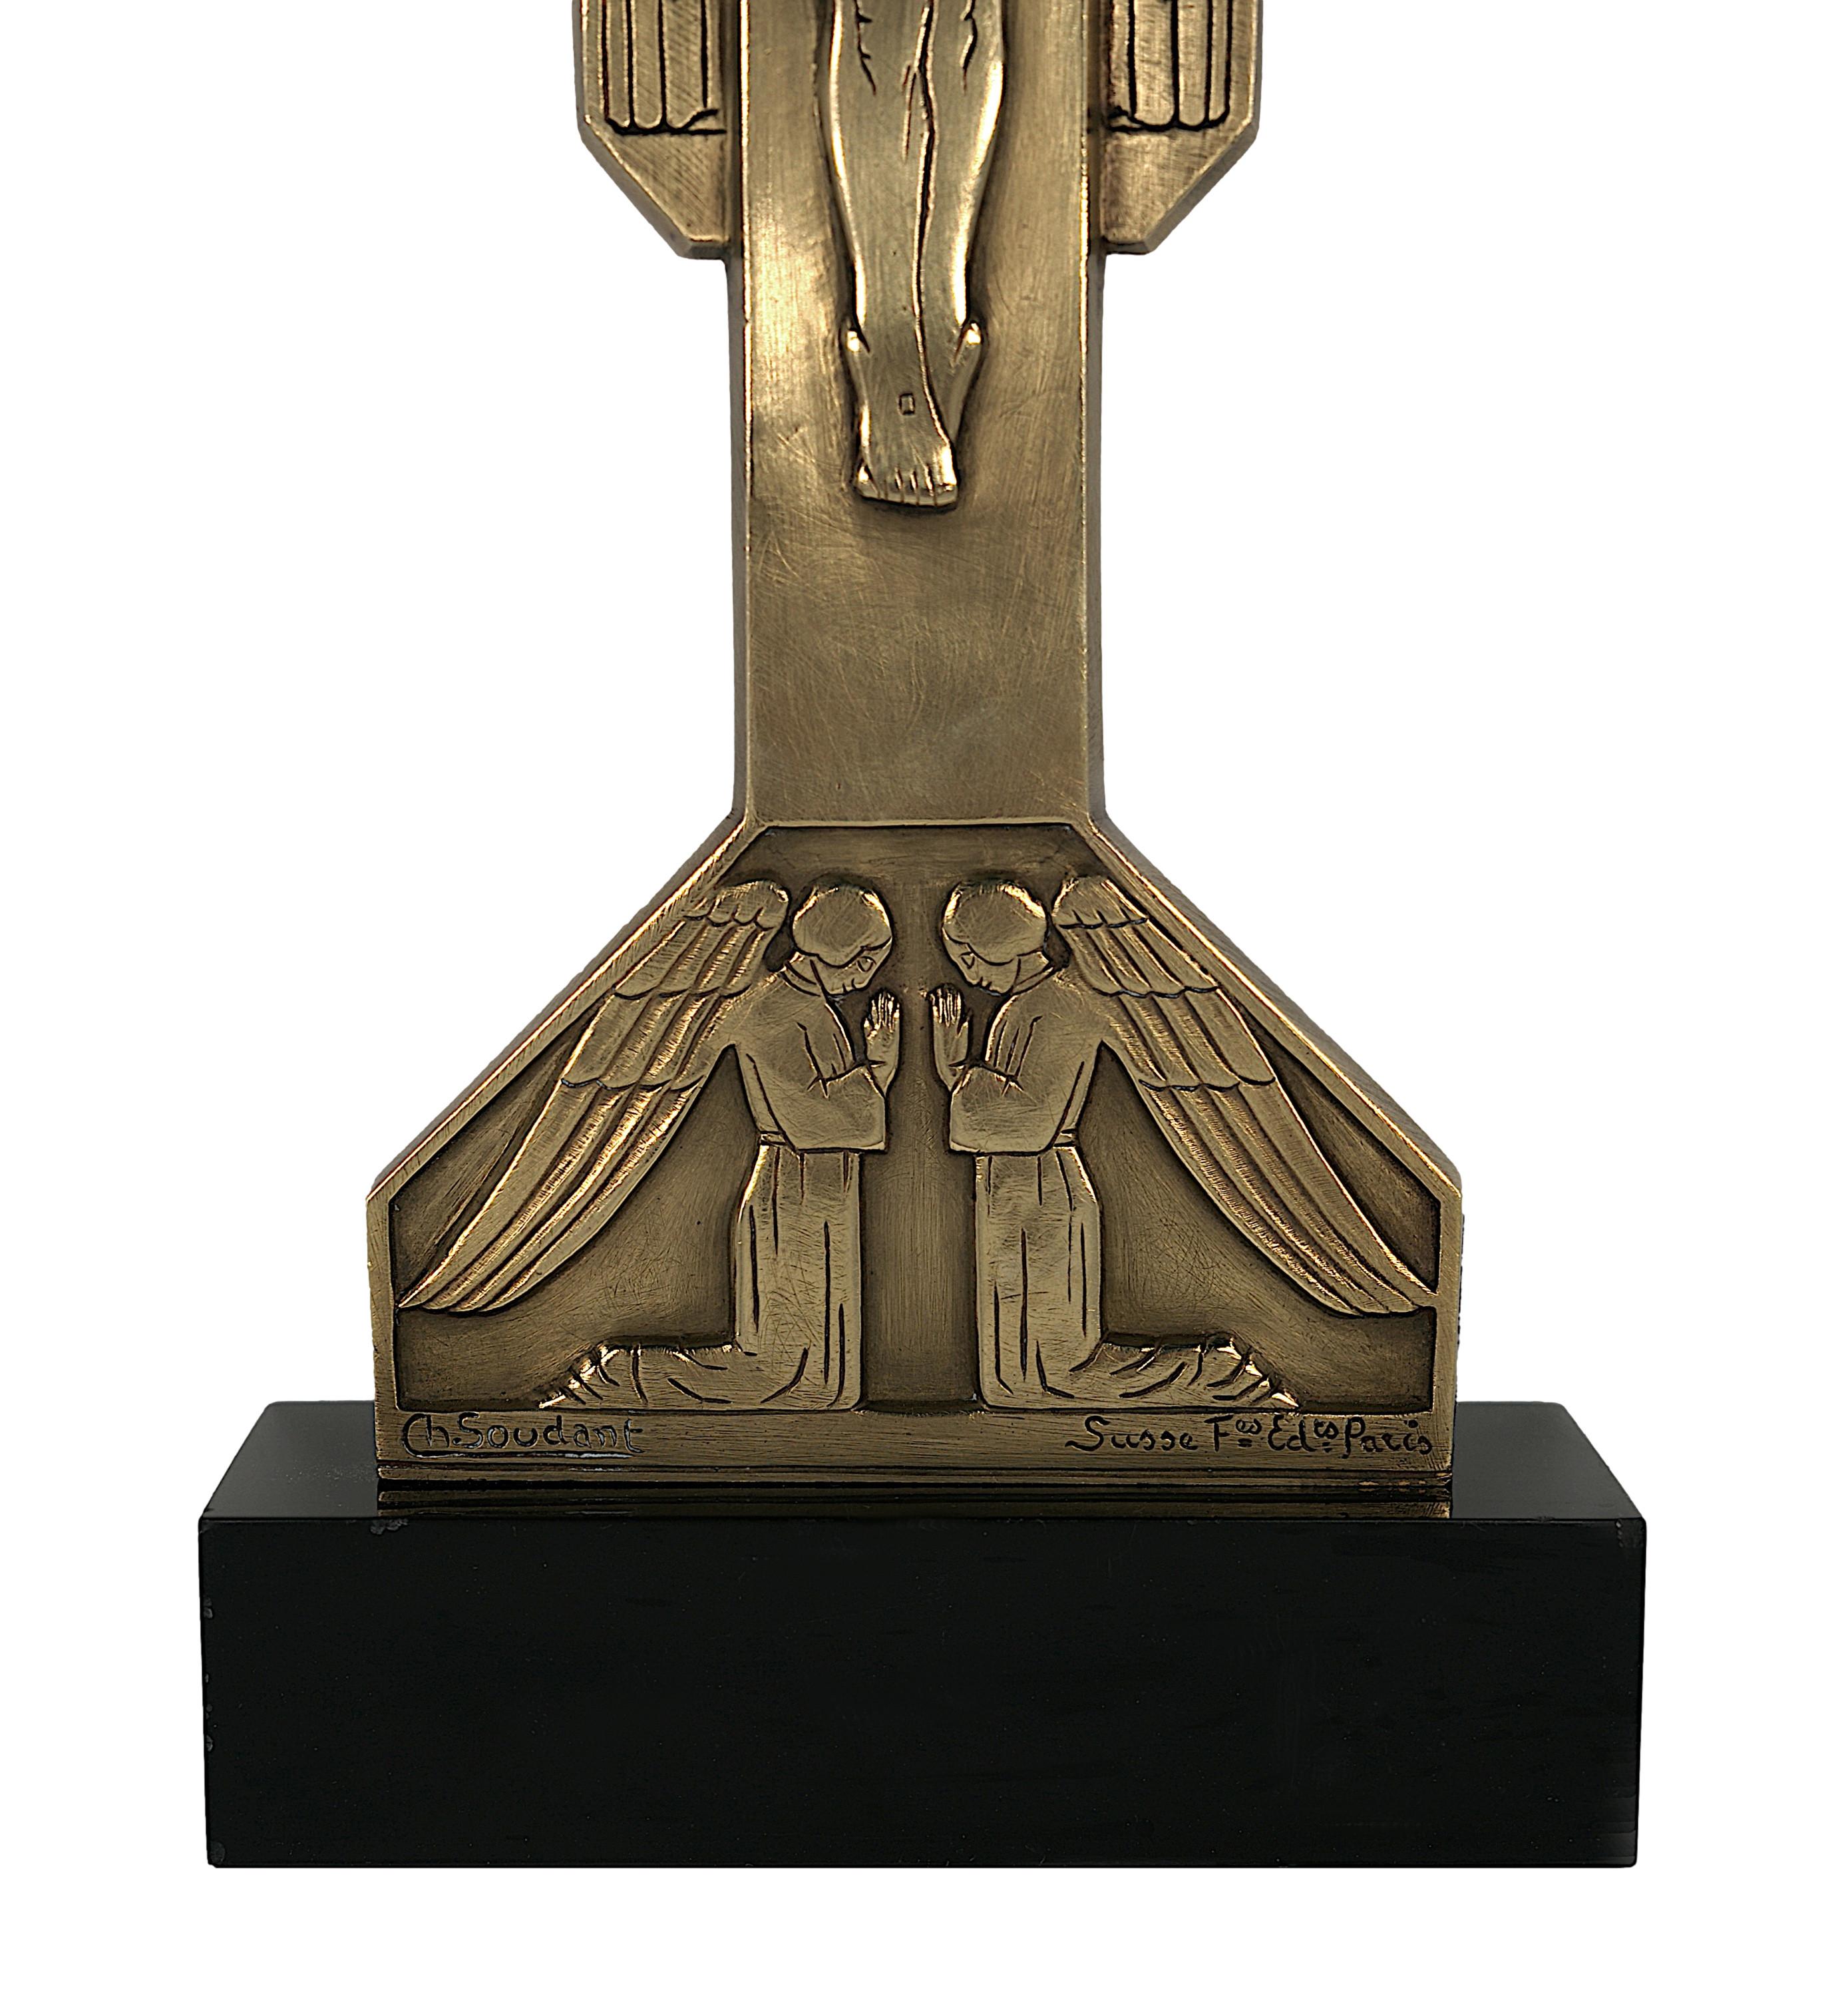 Charles SOUDANT French Art Deco Bronze Crucifix, 1930s For Sale 2